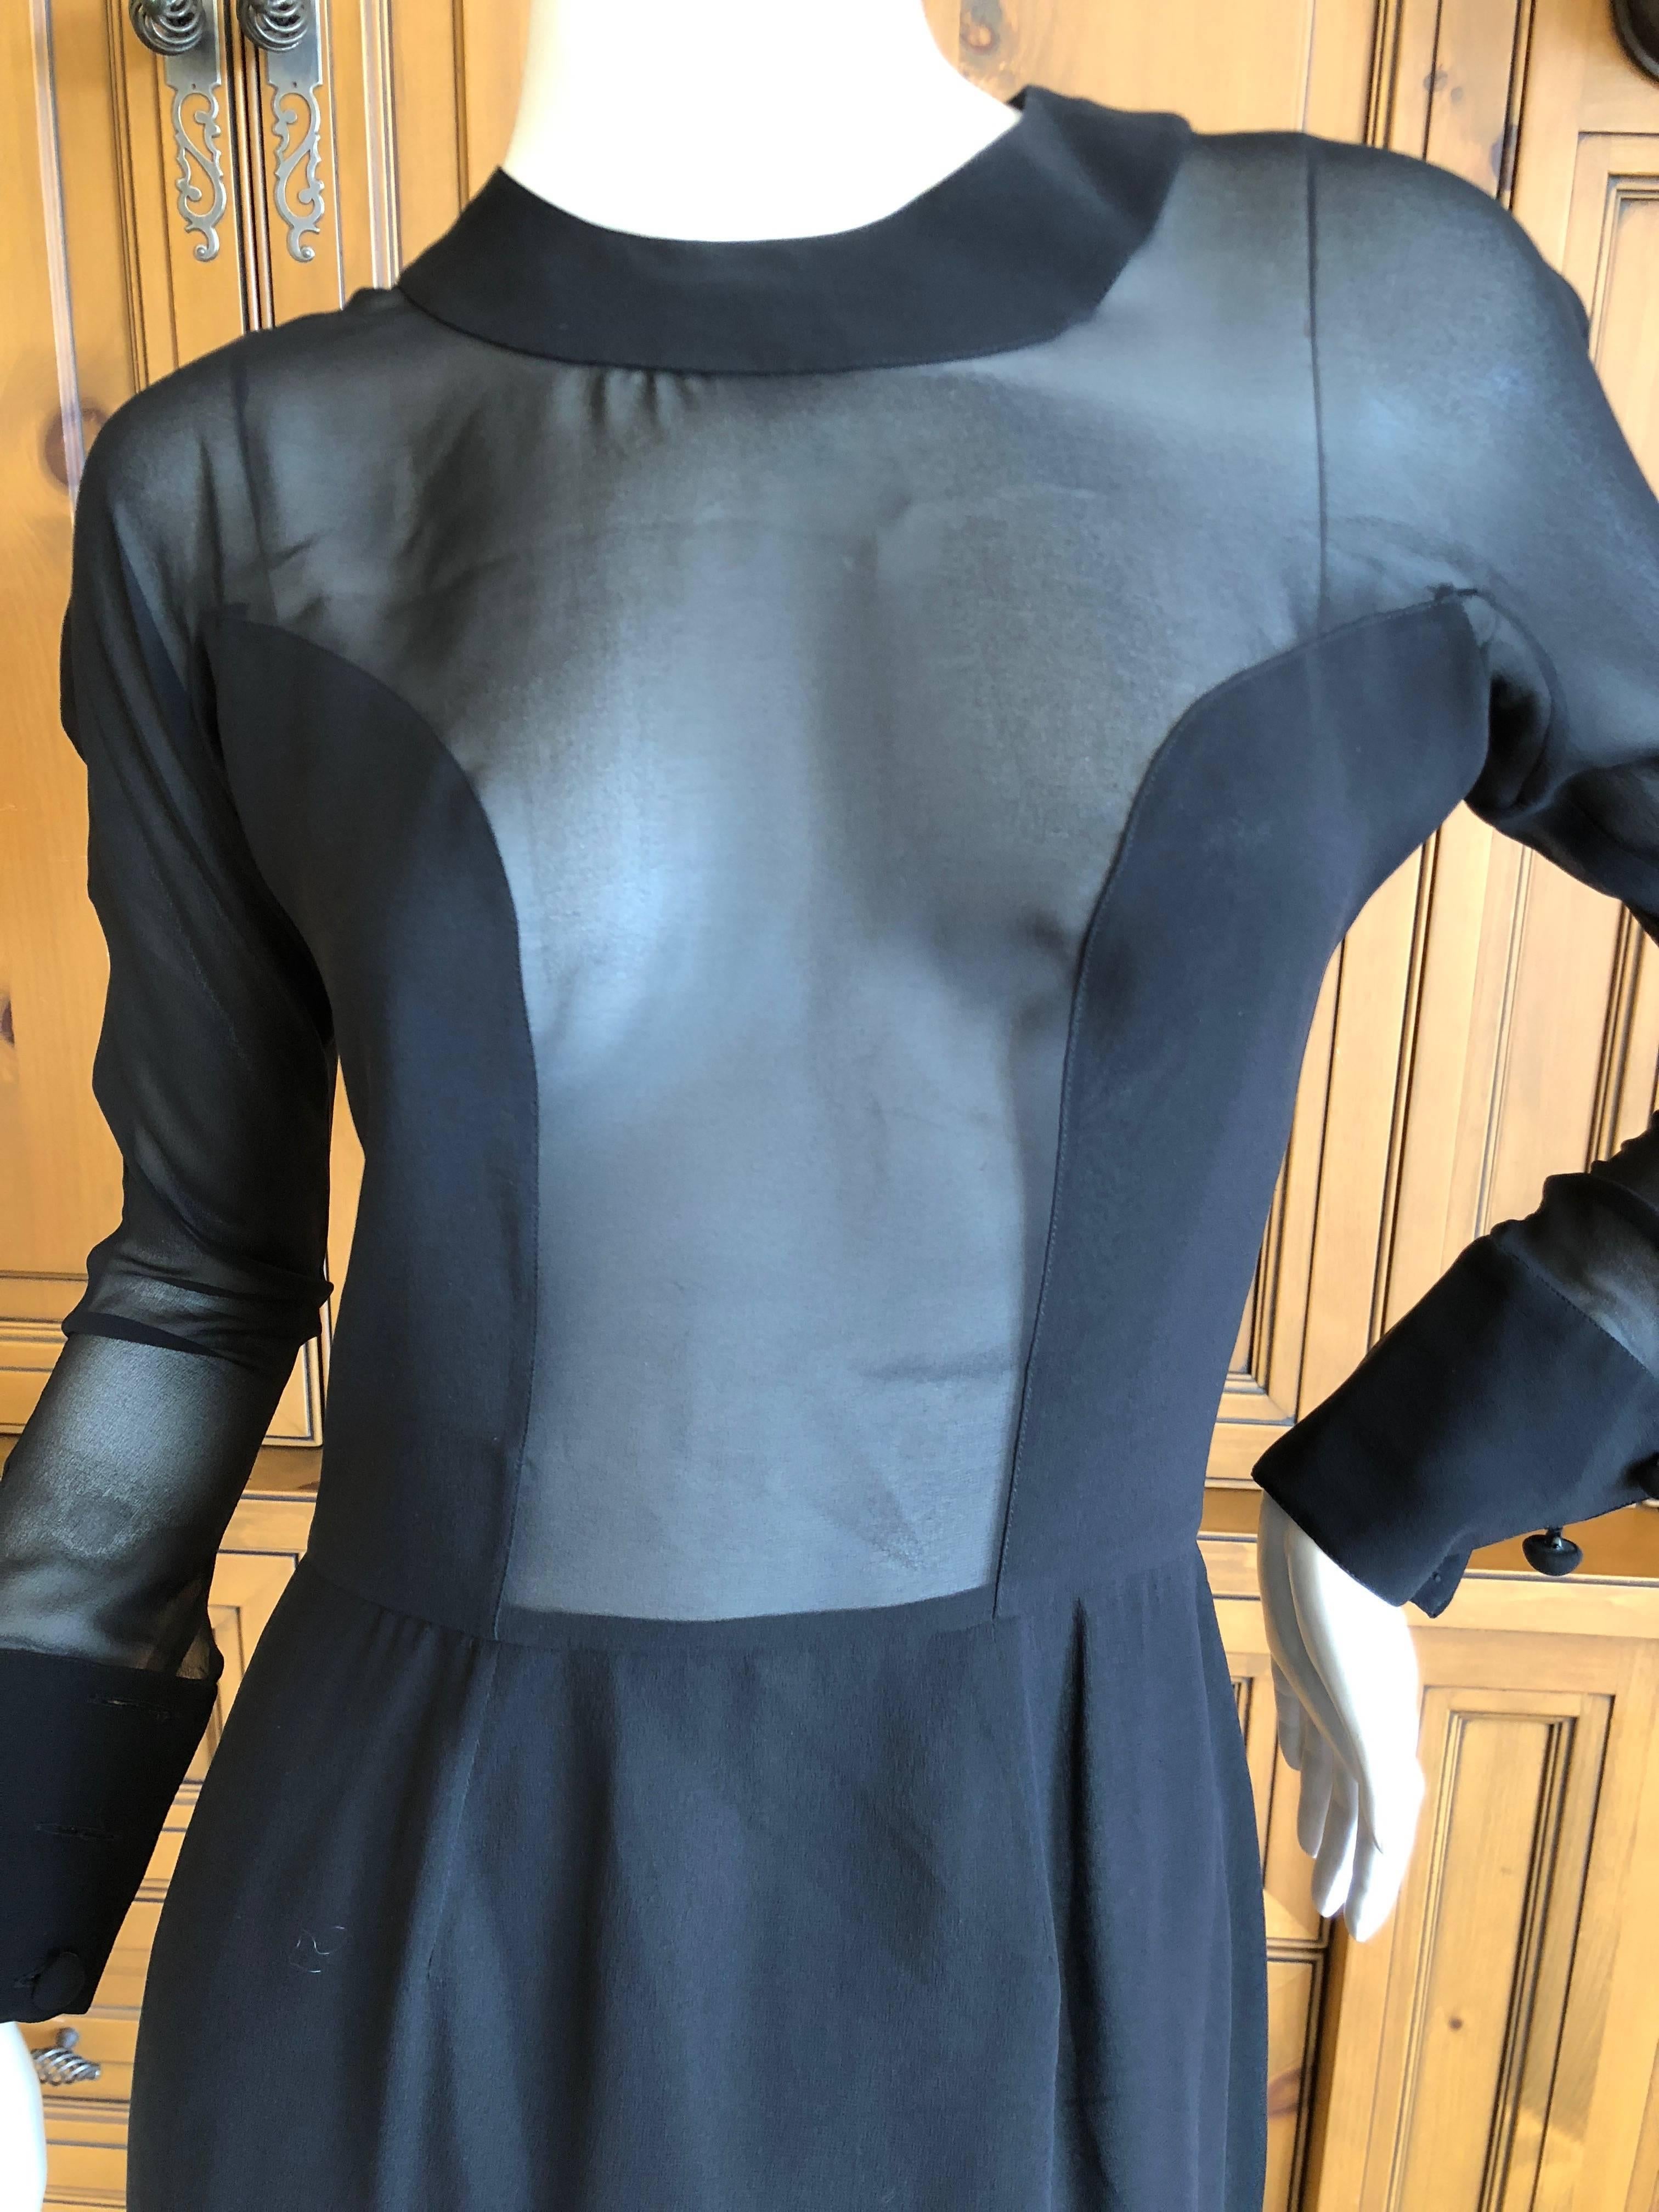 Christian Lacroix Vintage Sheer Black Silk Cocktail Dress with Matching Cape In Excellent Condition For Sale In Cloverdale, CA